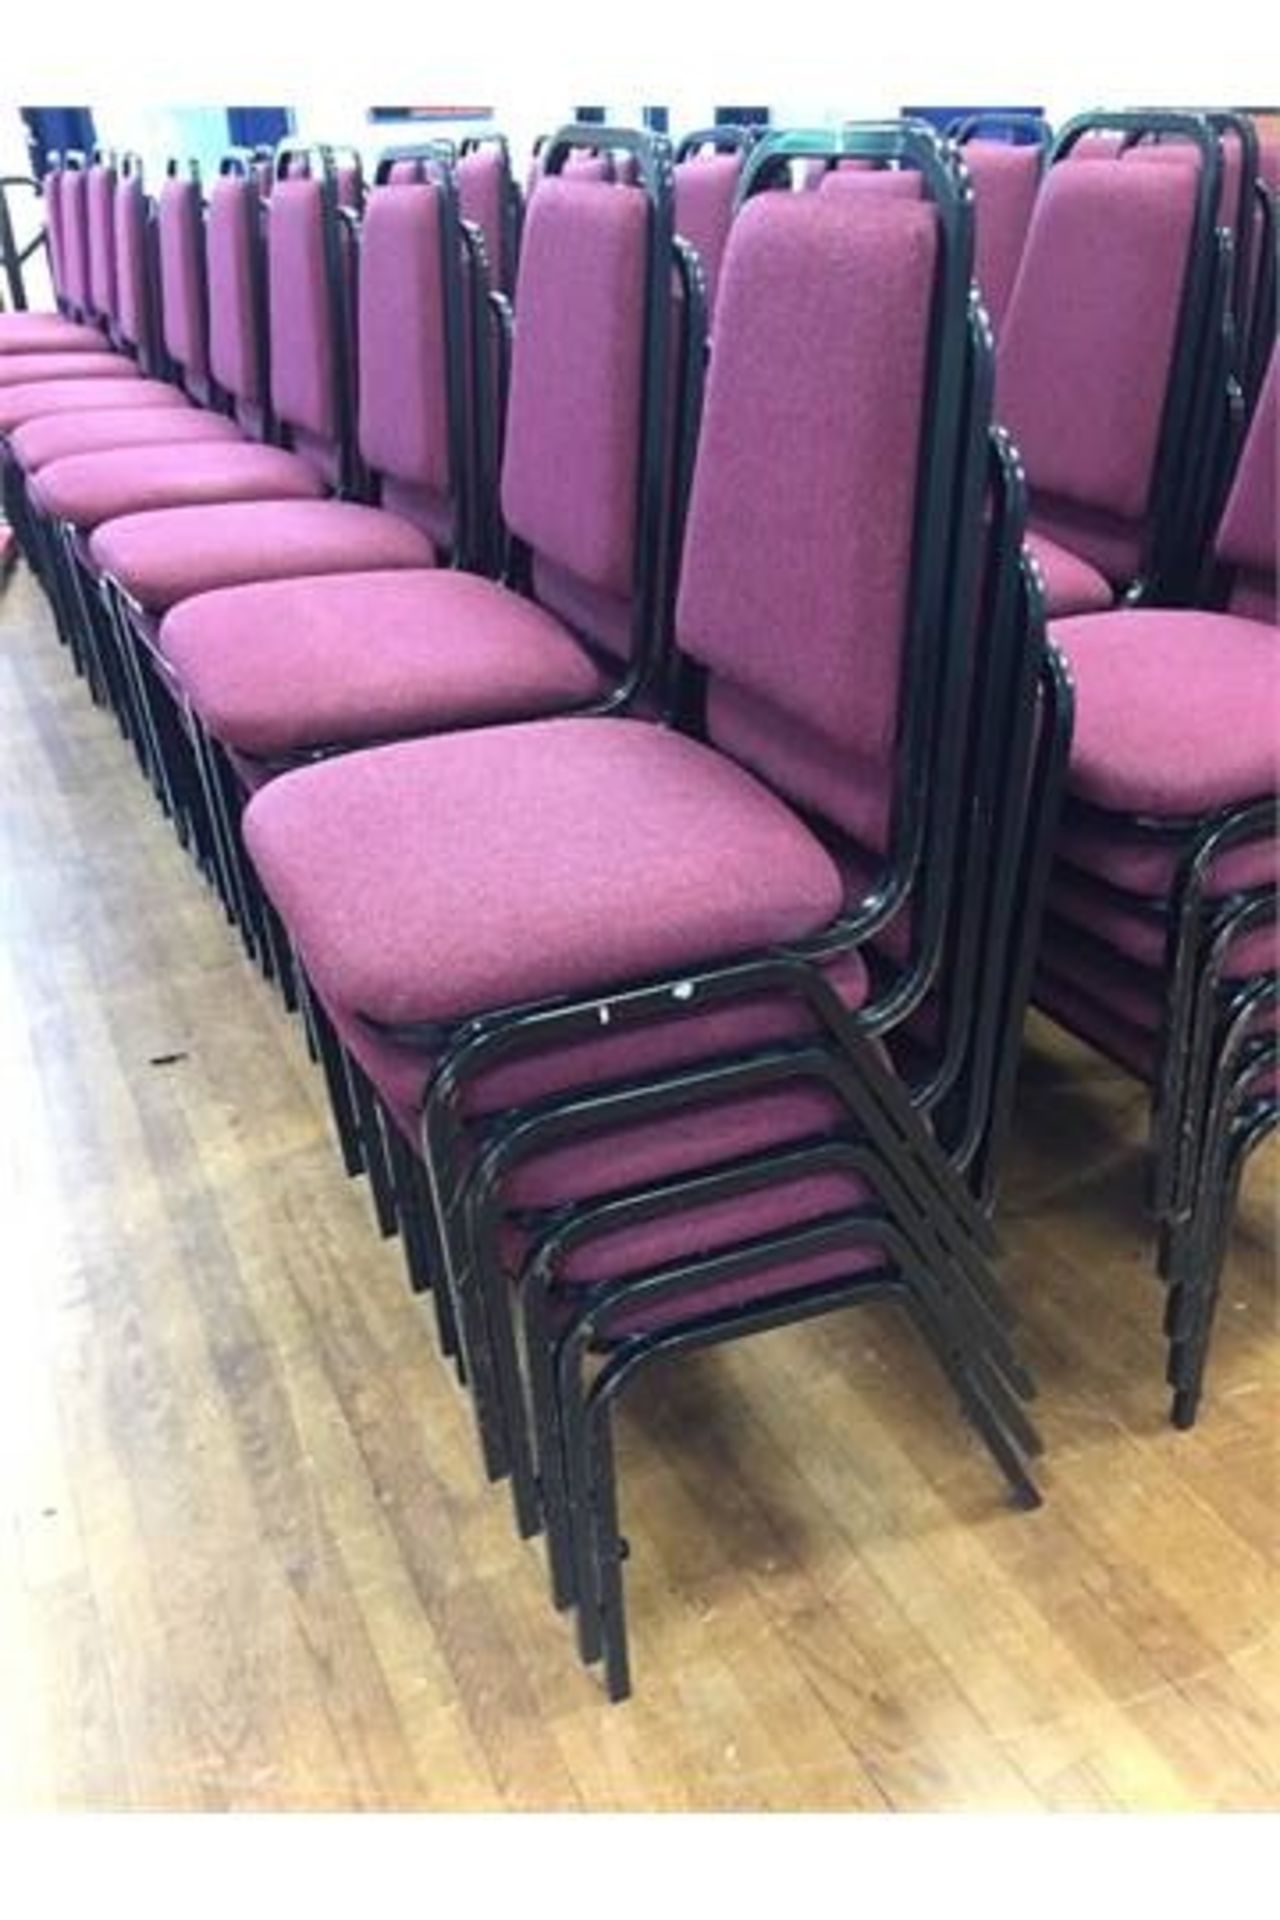 10x Stacking chairs. Hall